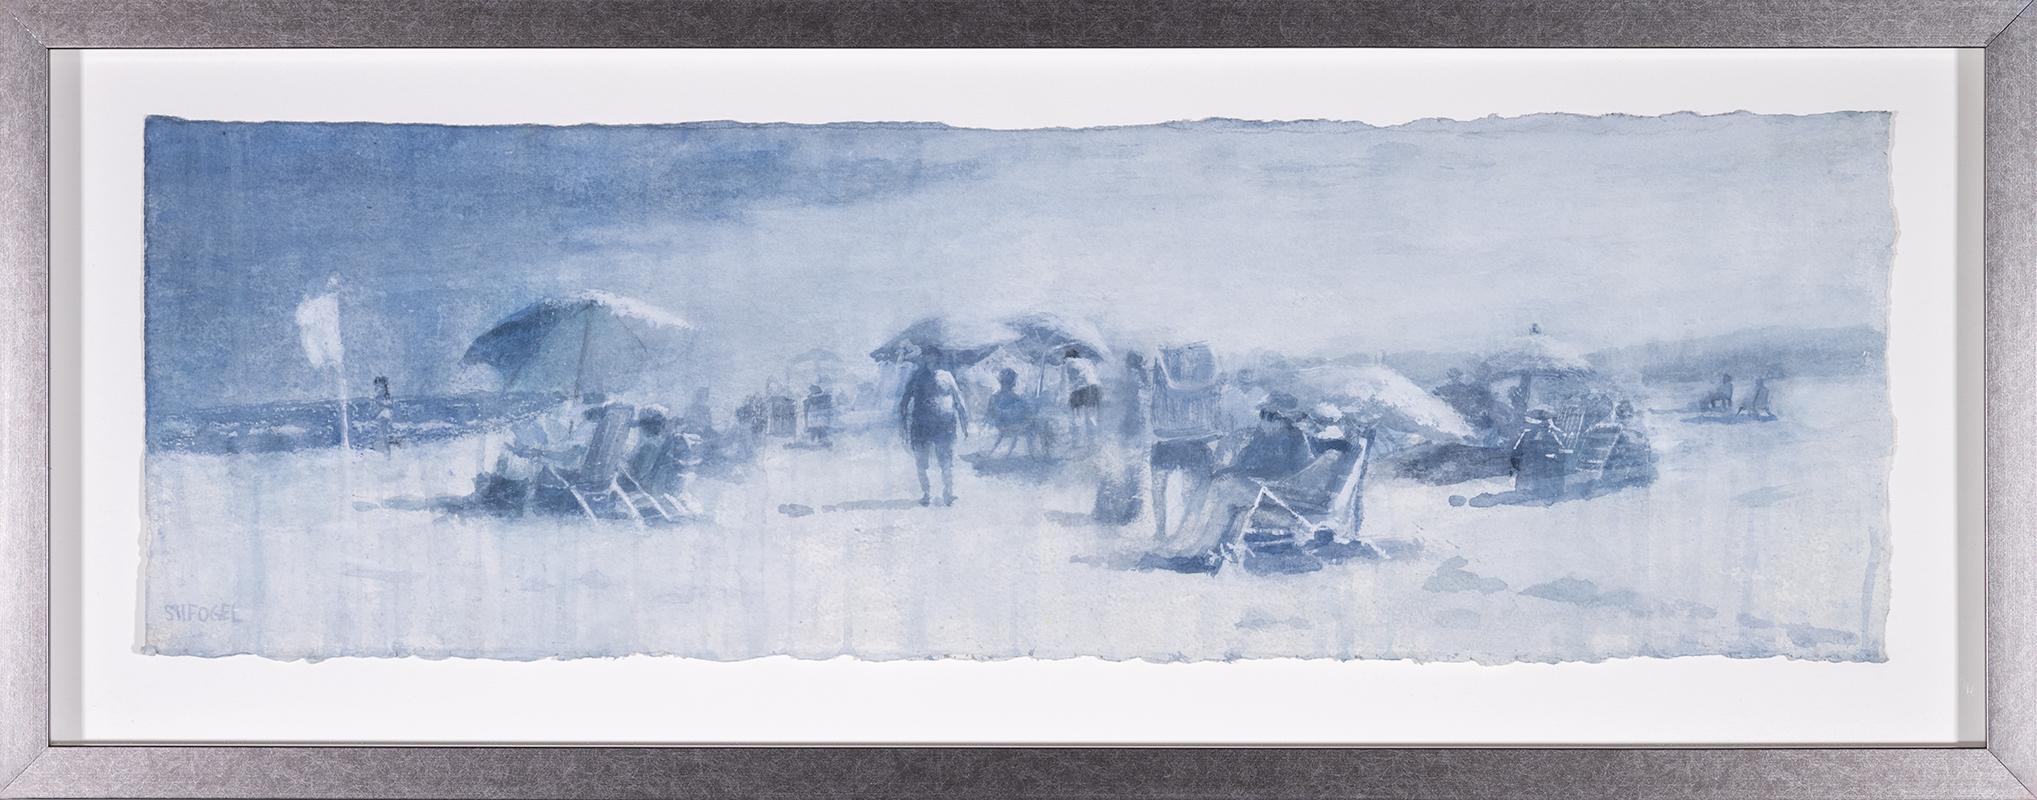 Jersey Shore (Whimsical Panoramic Watercolor of Figures at the Beach), Framed - Painting by Susan Hope Fogel